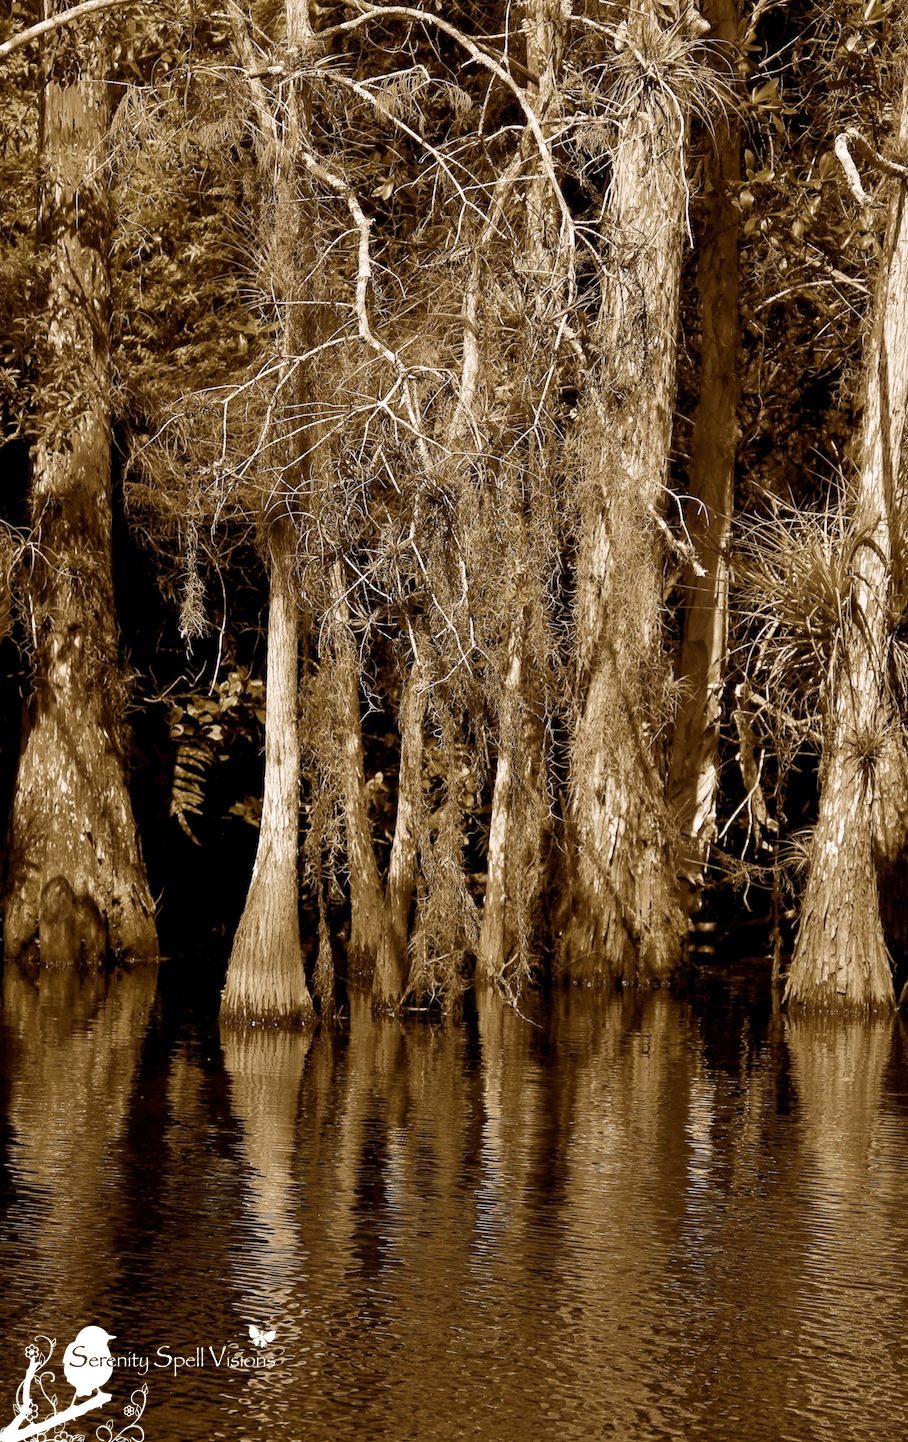 Cypress Trees Along the Owahee Trail in Grassy Waters Preserve, FL